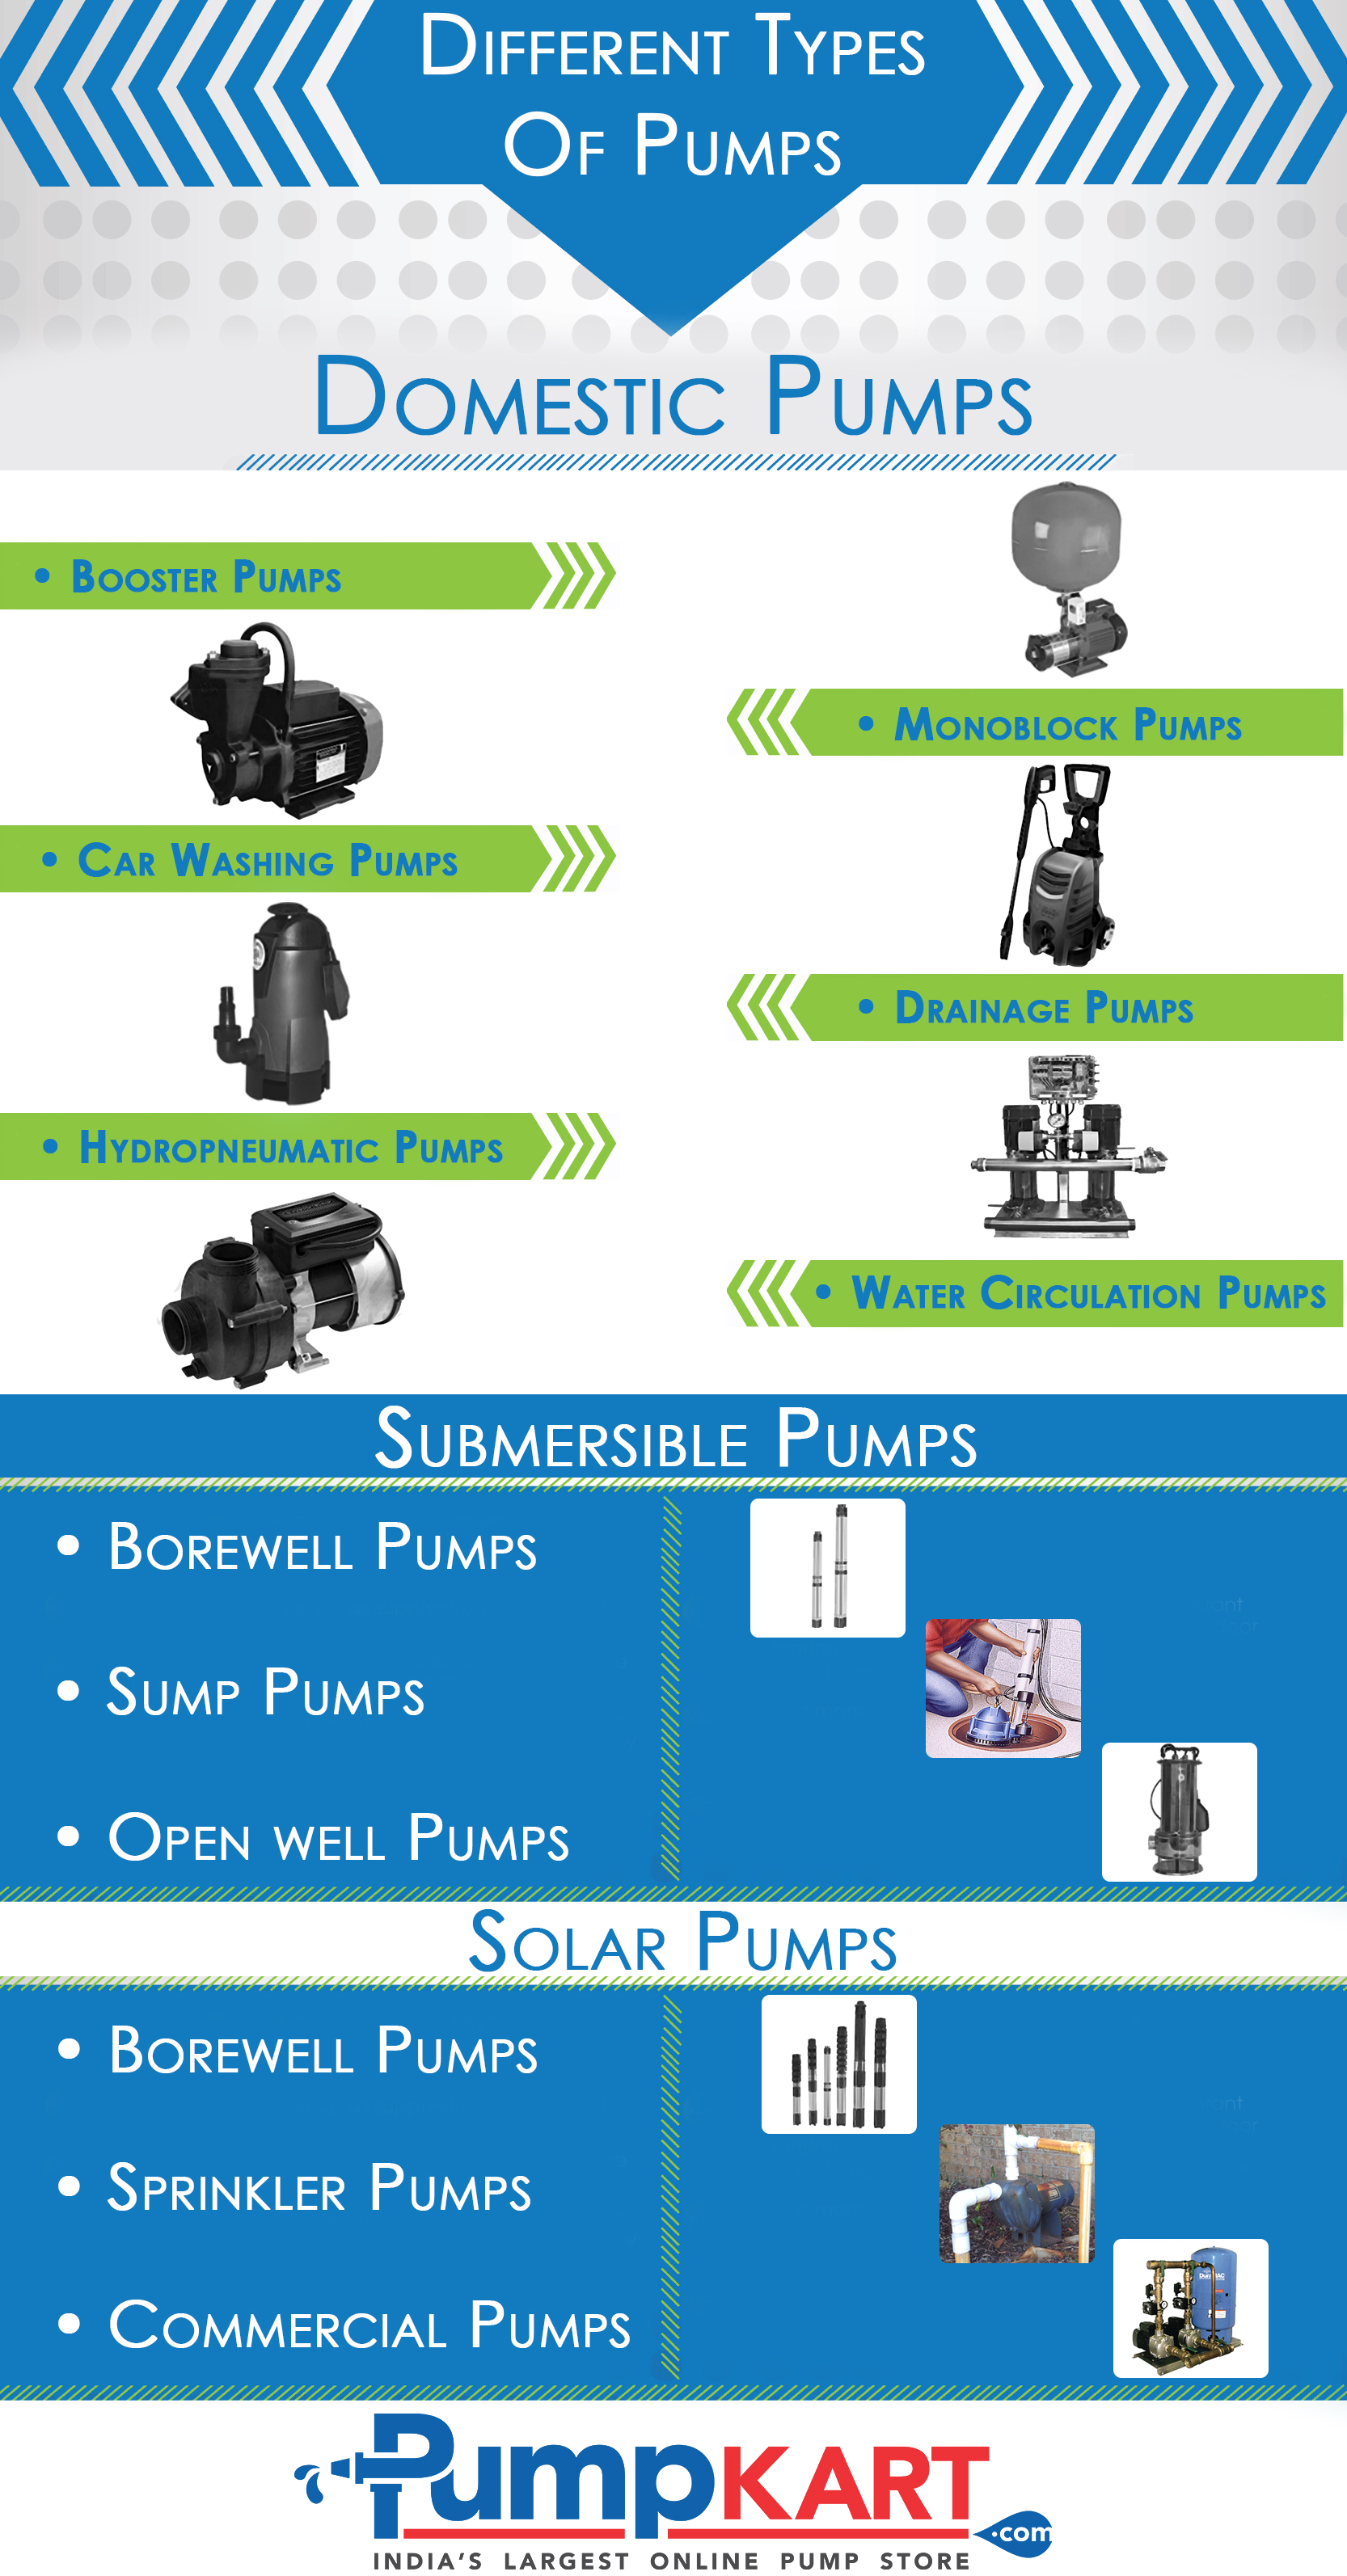 Different Types Of Pumps Visually